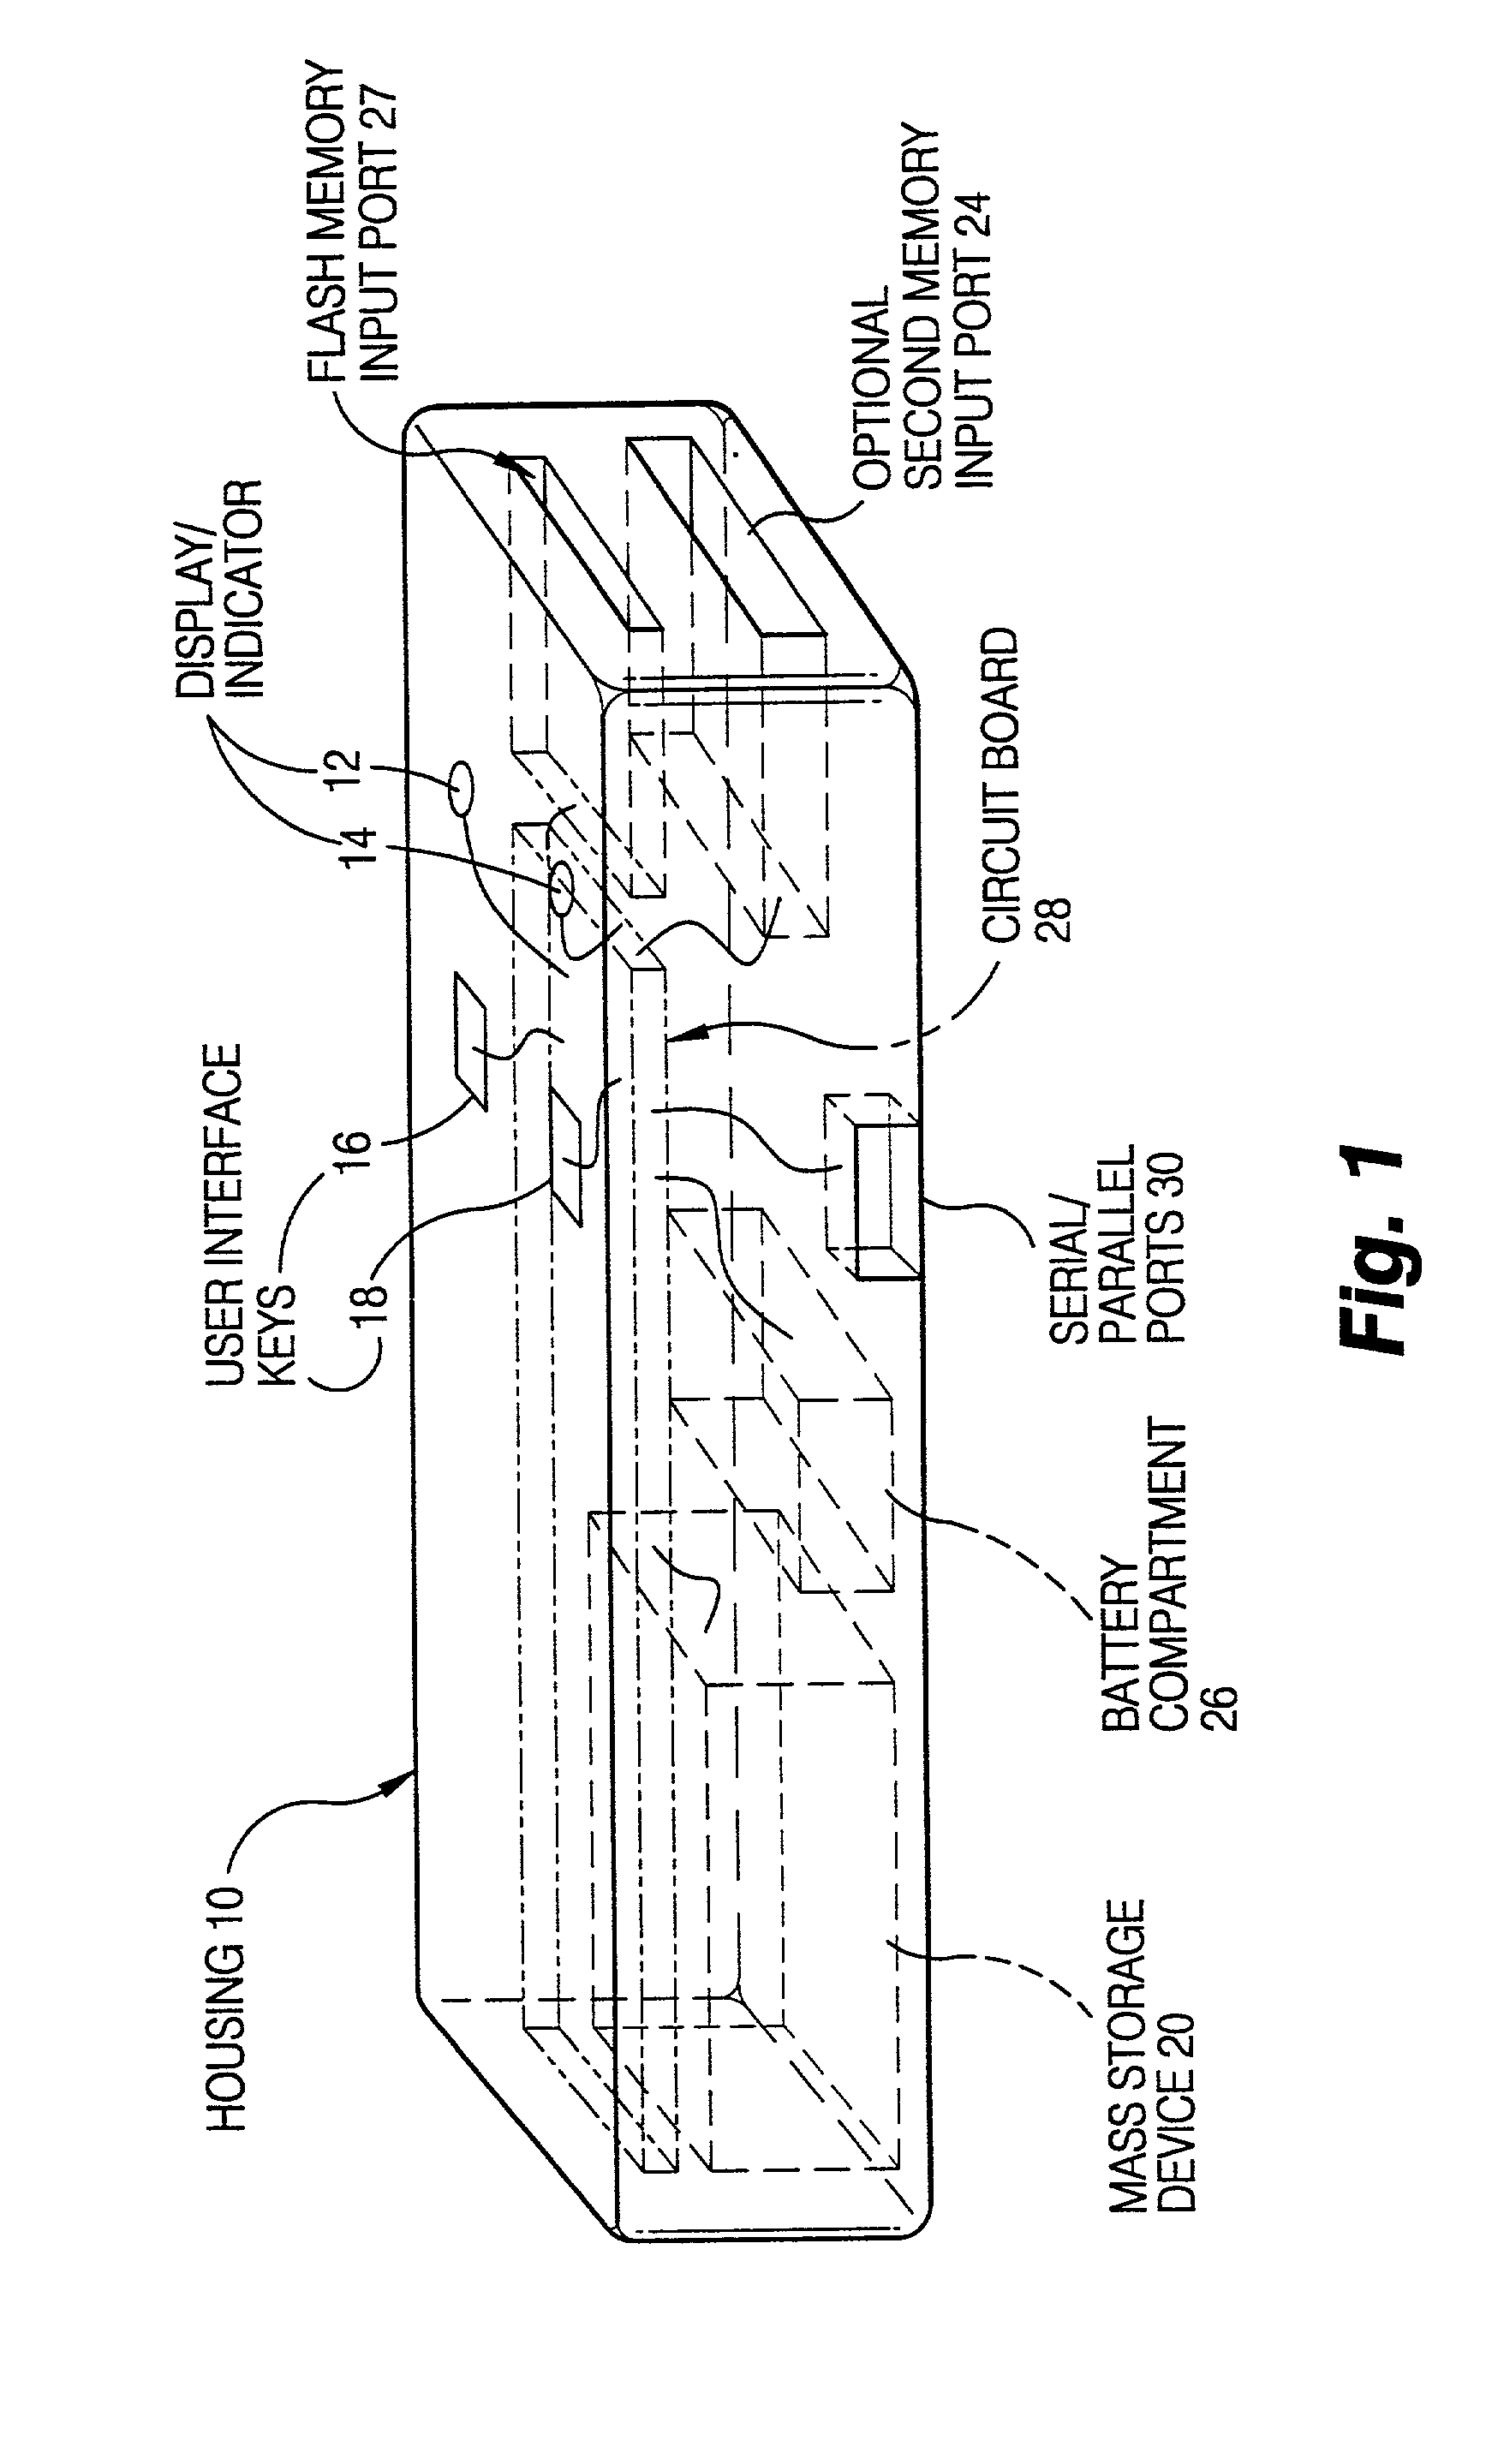 Enhanced digital data collector for removable memory modules